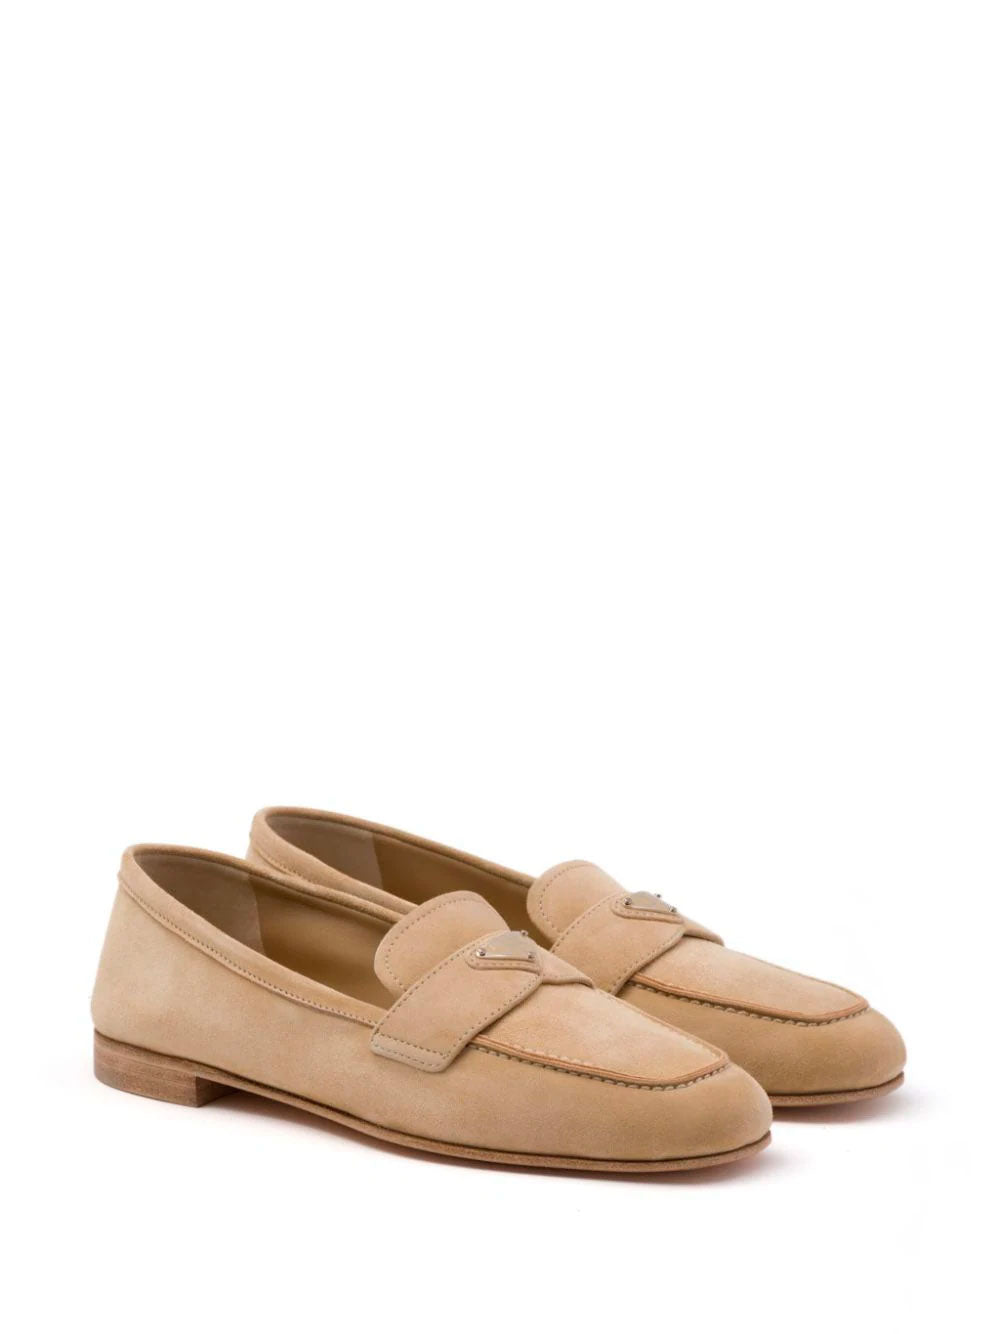 Triangle-logo loafers